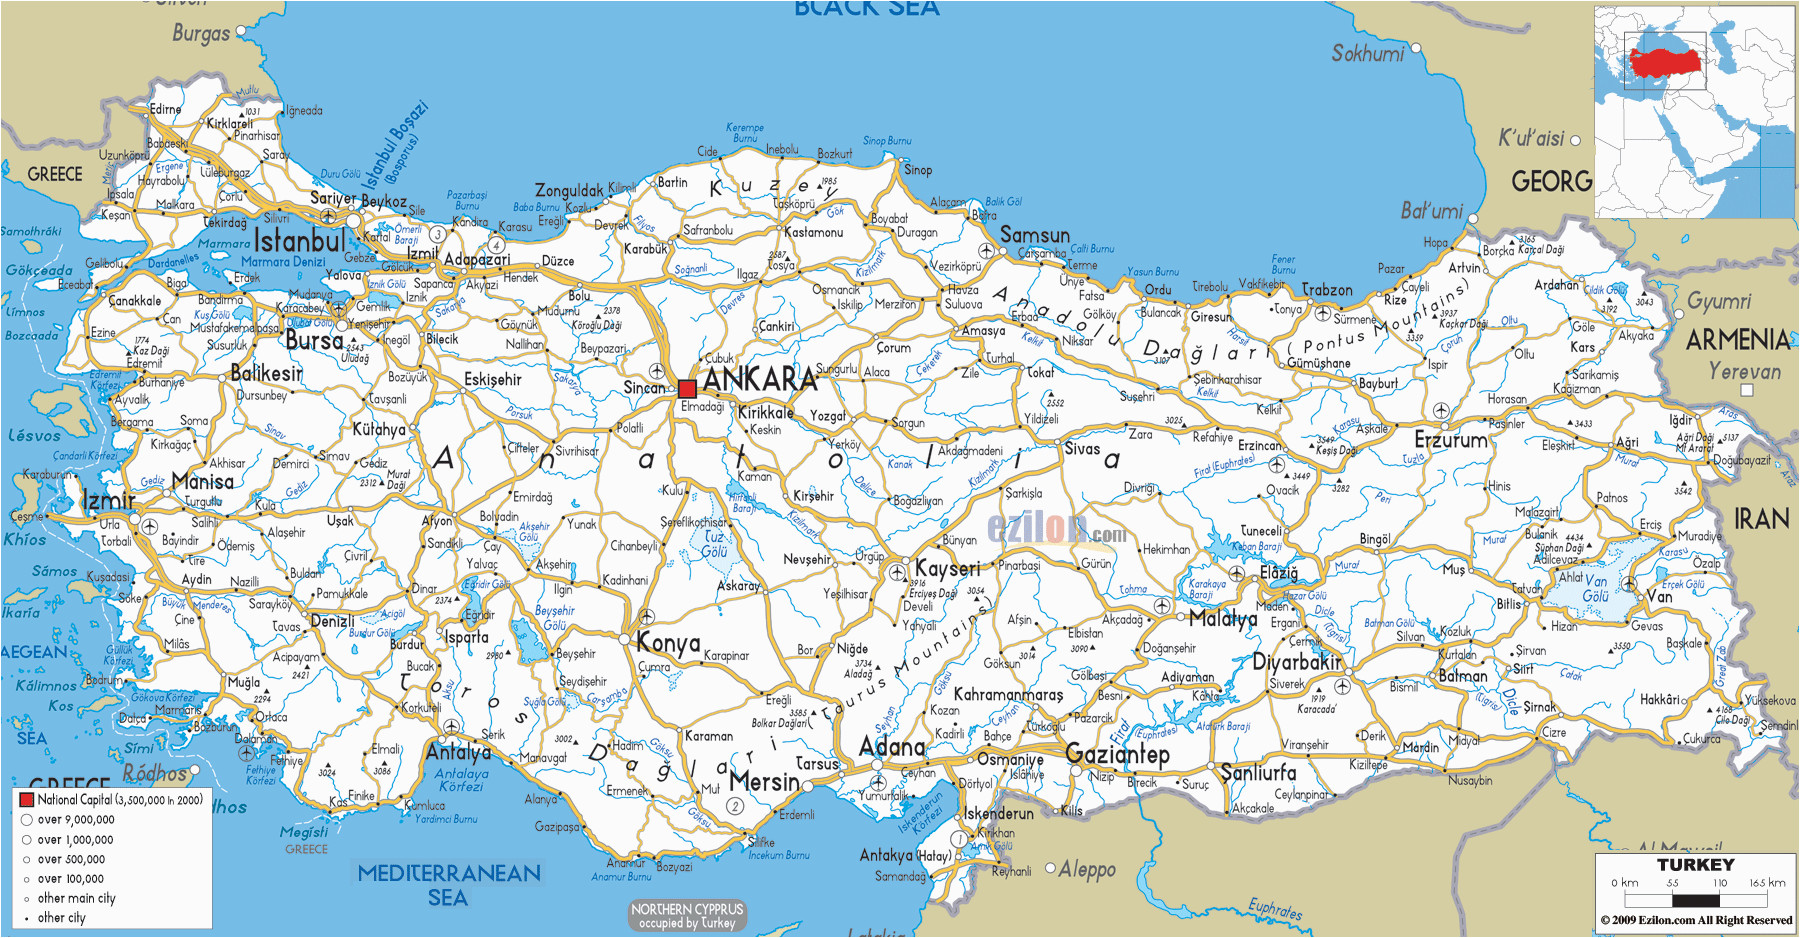 road map of turkey italy greece turkey and places i